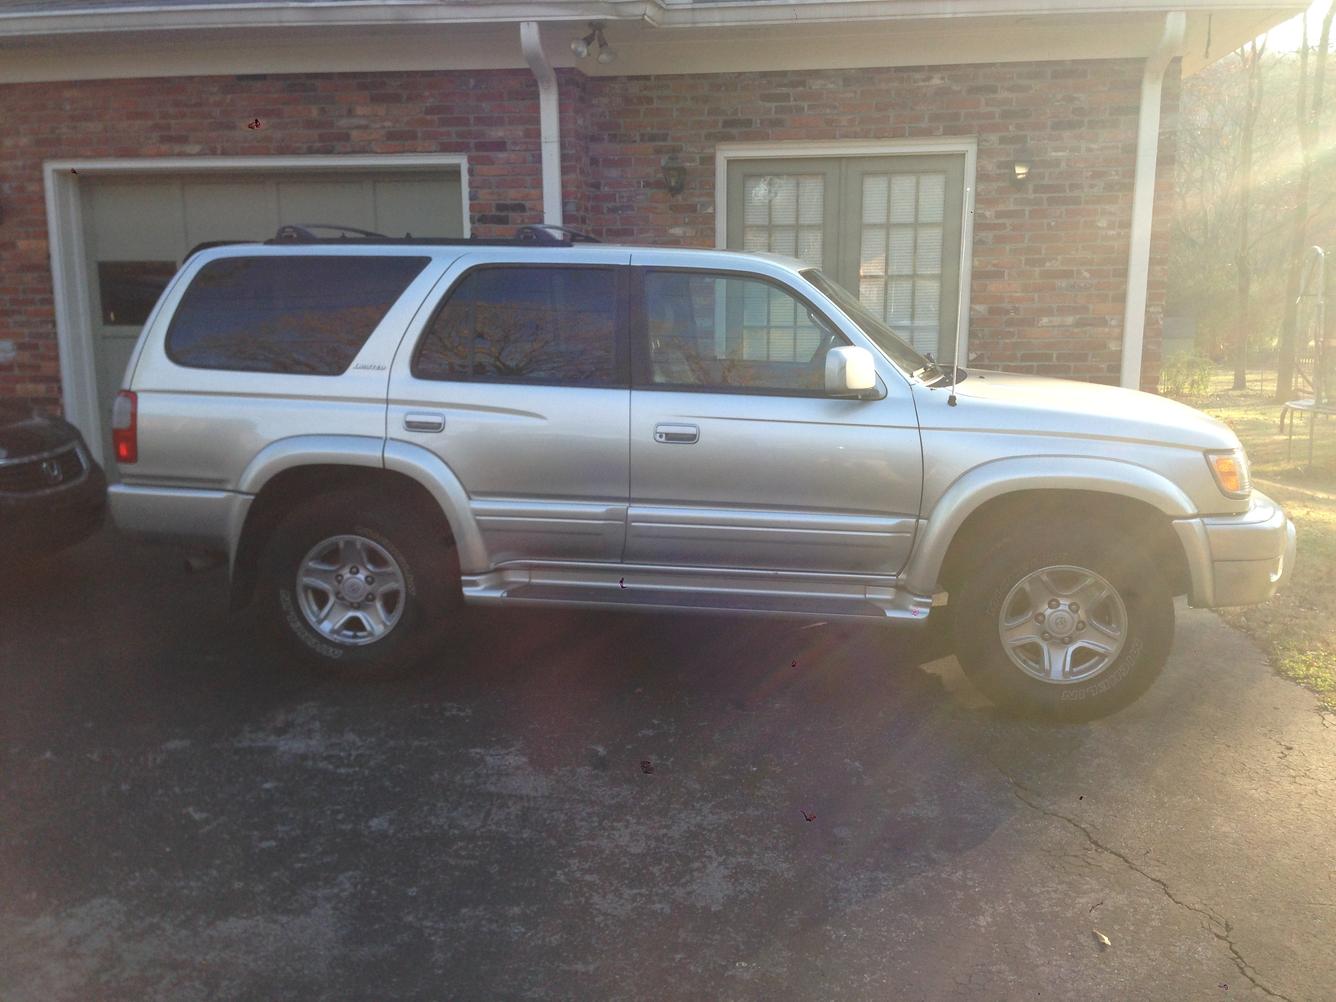 Excited new owner of 1999 4Runner, thoughts/advice on my ideas for modifications?-t4r5-jpg